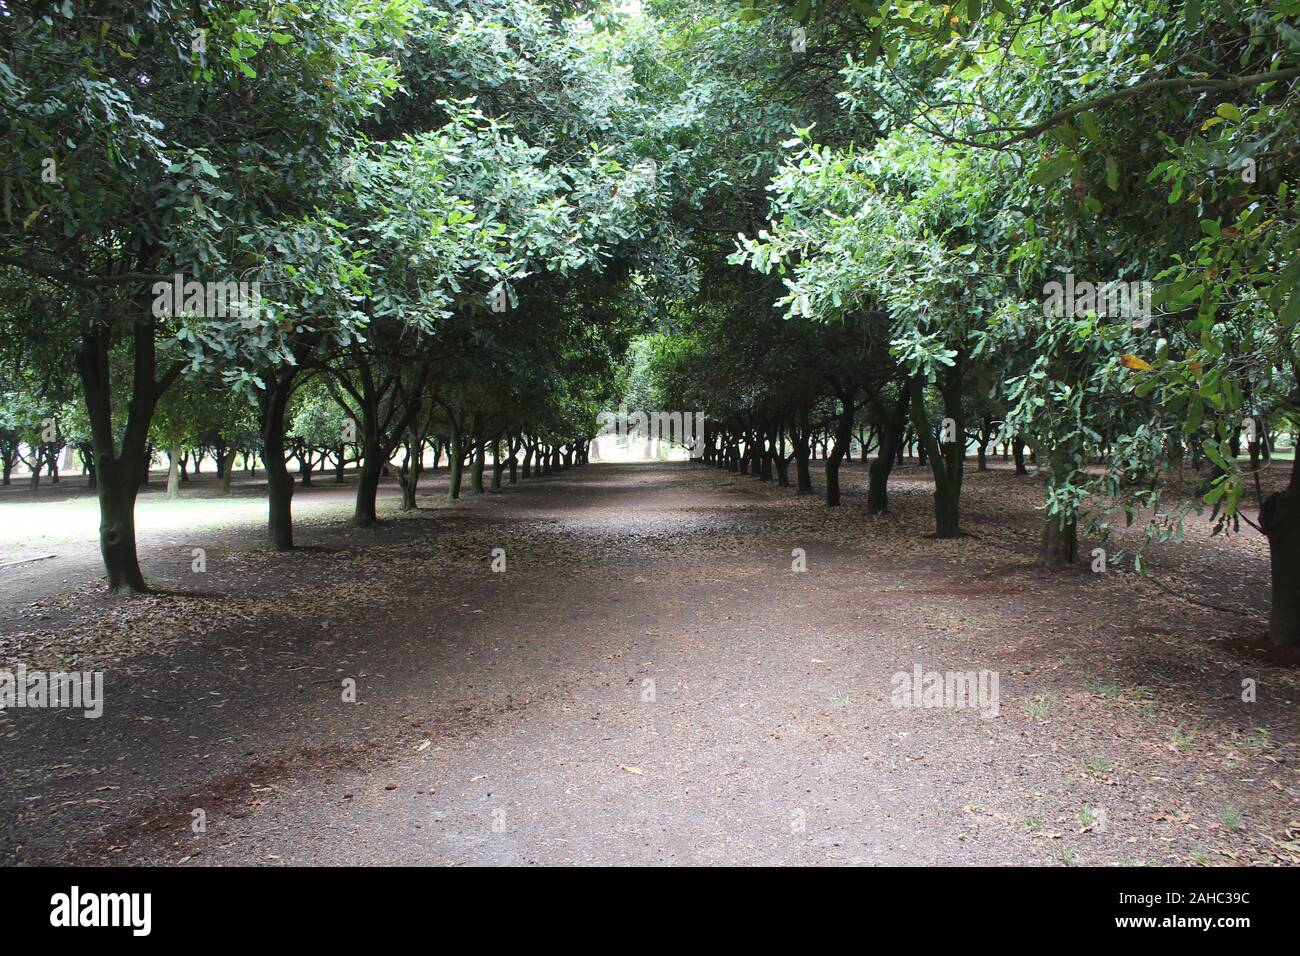 Macadamia trees line this perfect path on a mild summer day in Australia.  The scientific name for these trees is: Macadamia Integrifolia. Stock Photo